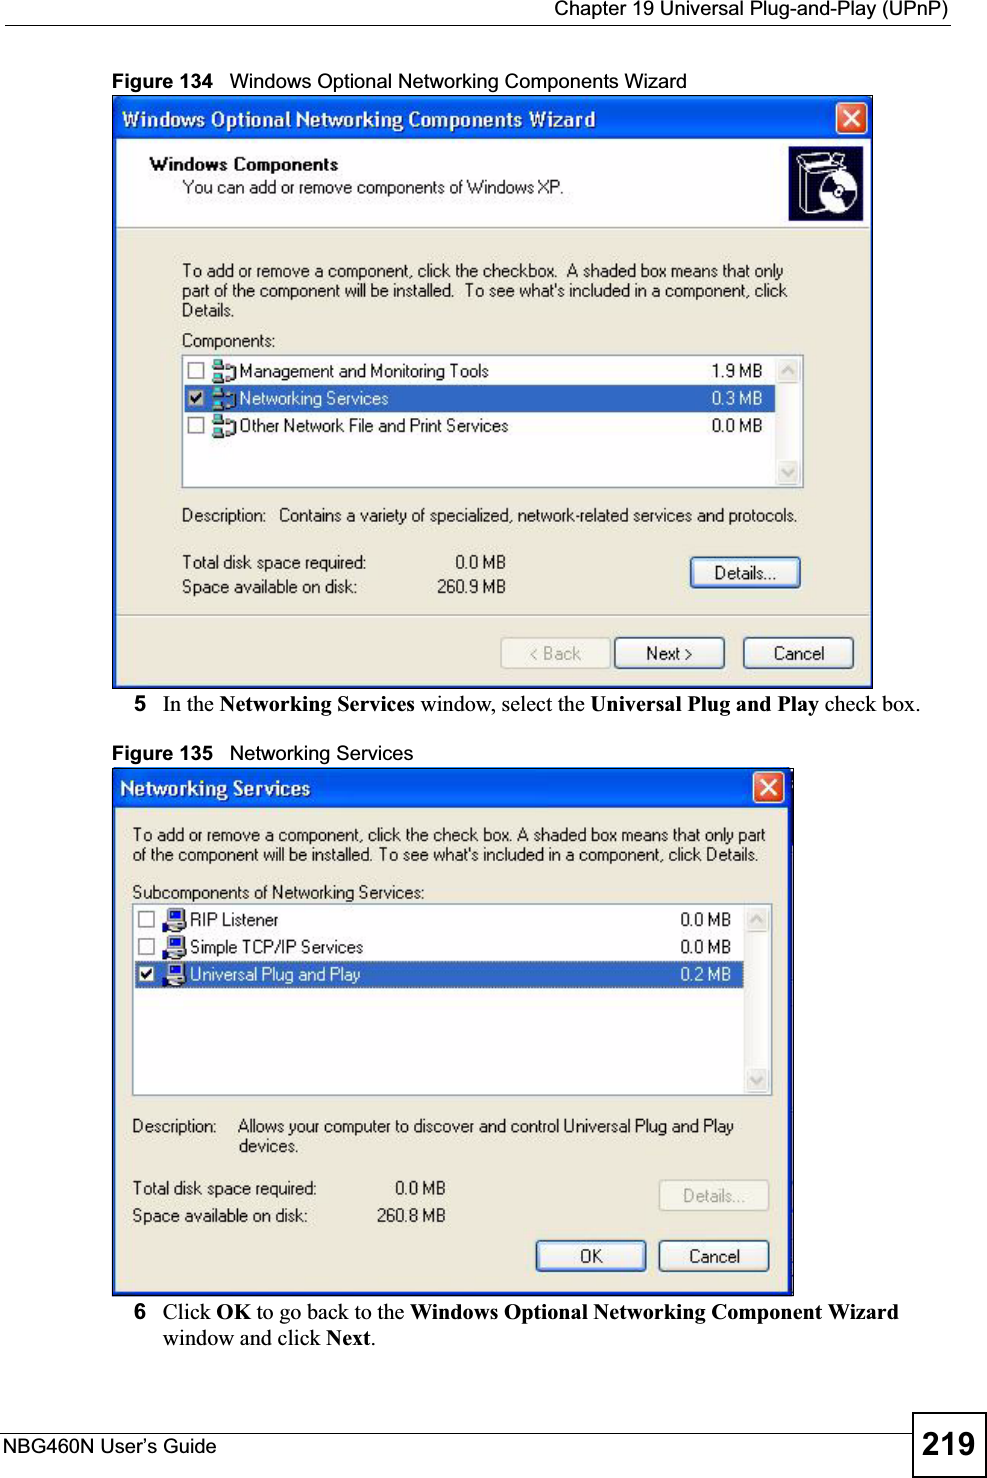  Chapter 19 Universal Plug-and-Play (UPnP)NBG460N User’s Guide 219Figure 134   Windows Optional Networking Components Wizard5In the Networking Services window, select the Universal Plug and Play check box. Figure 135   Networking Services6Click OK to go back to the Windows Optional Networking Component Wizard window and click Next.